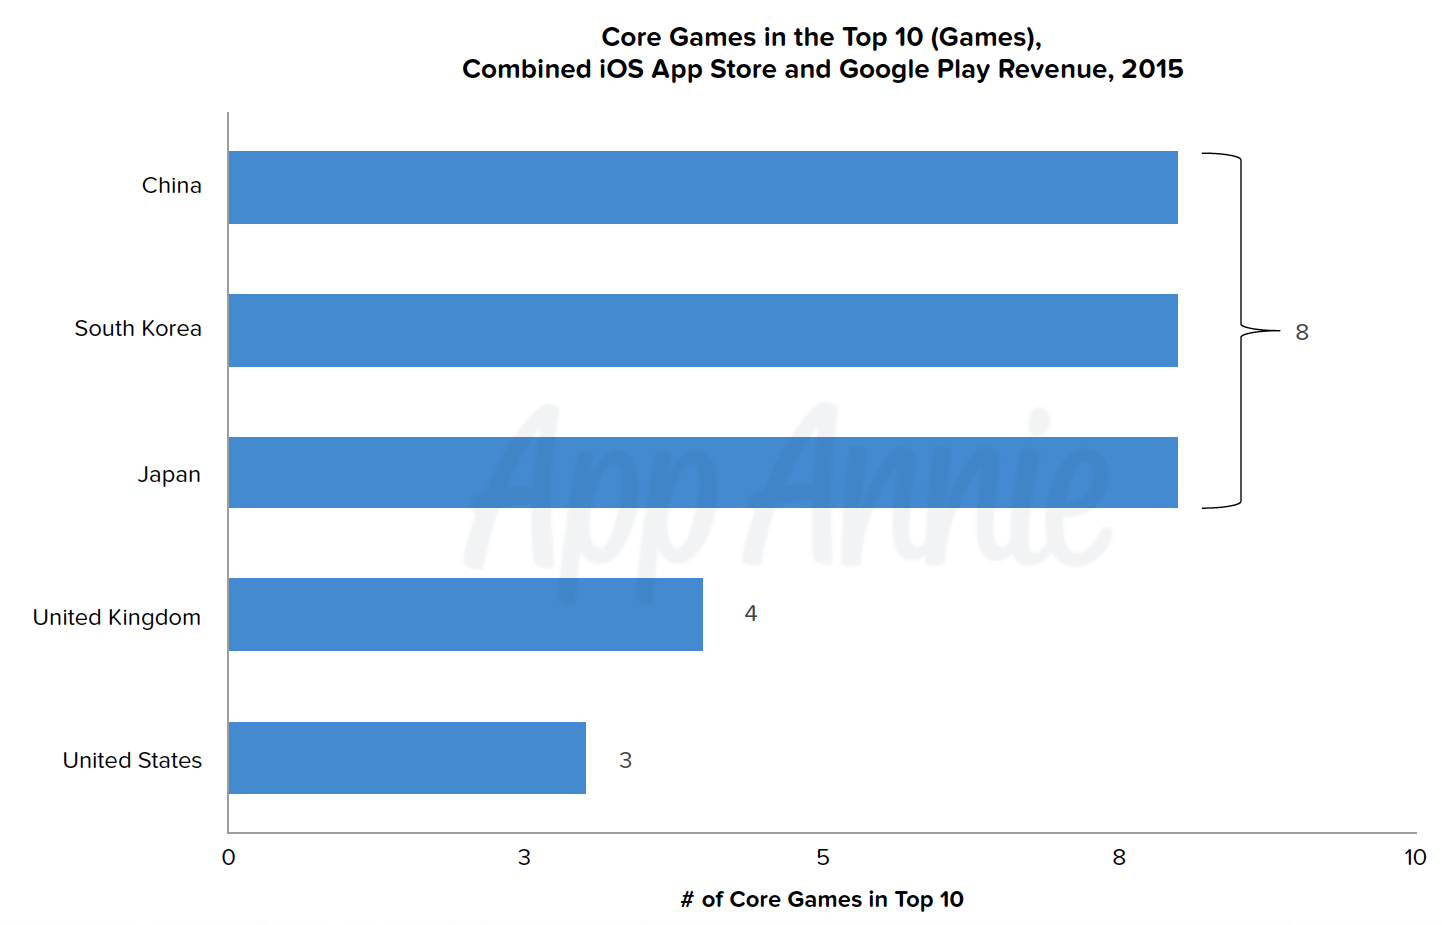 Core games in the Top 10 Combined iOS and Google Play Revenue